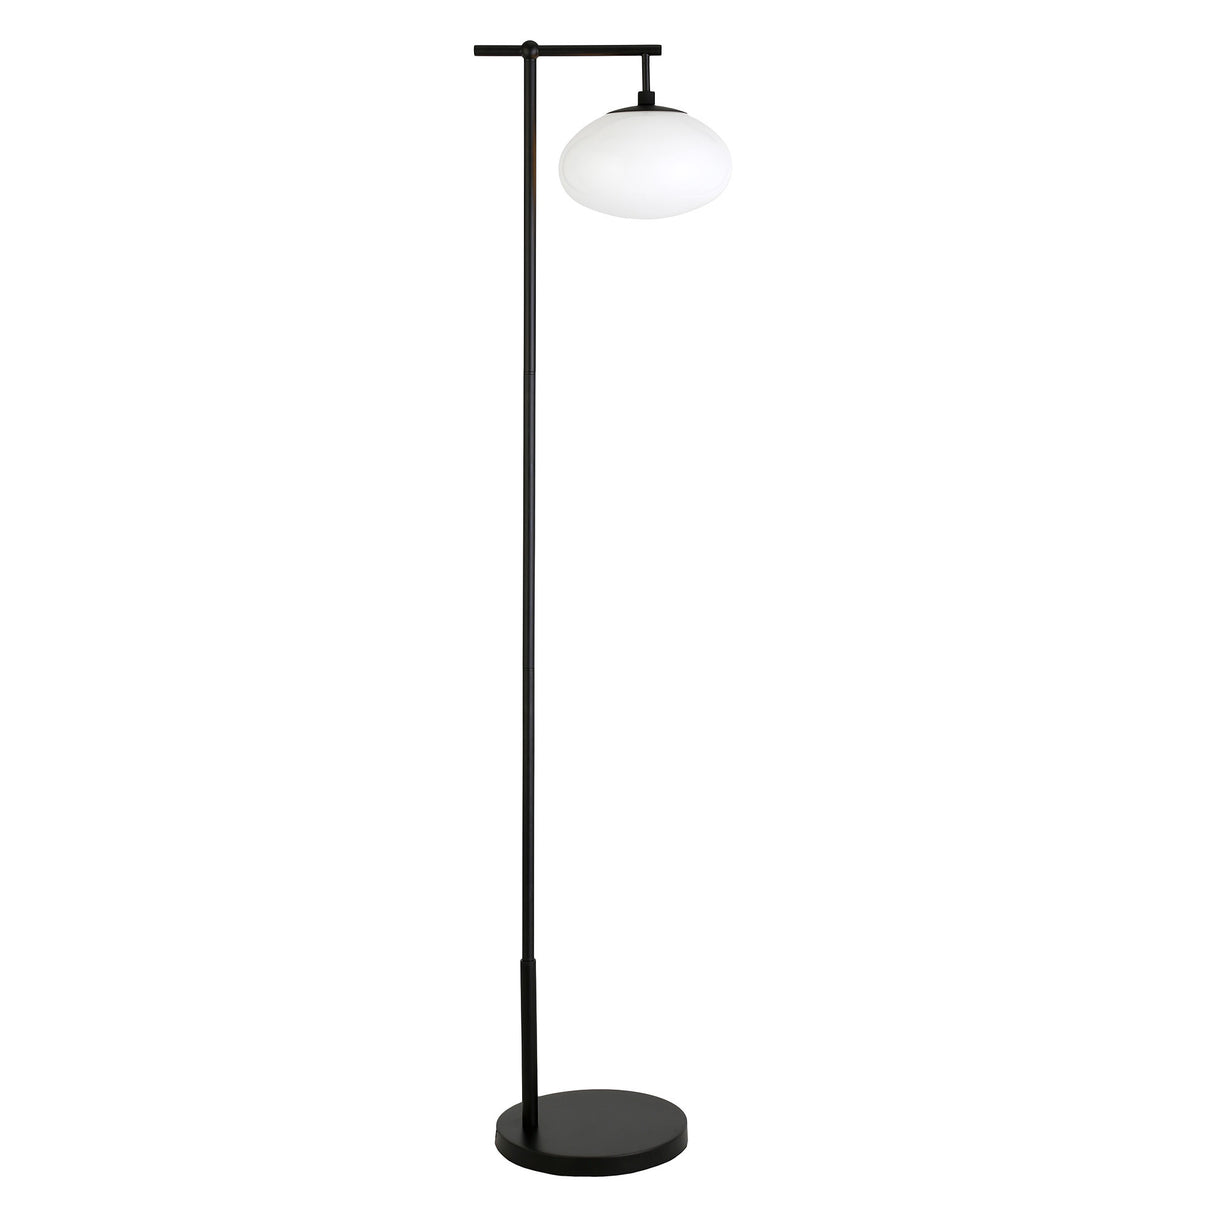 68" Black Reading Floor Lamp With White Frosted Glass Globe Shade